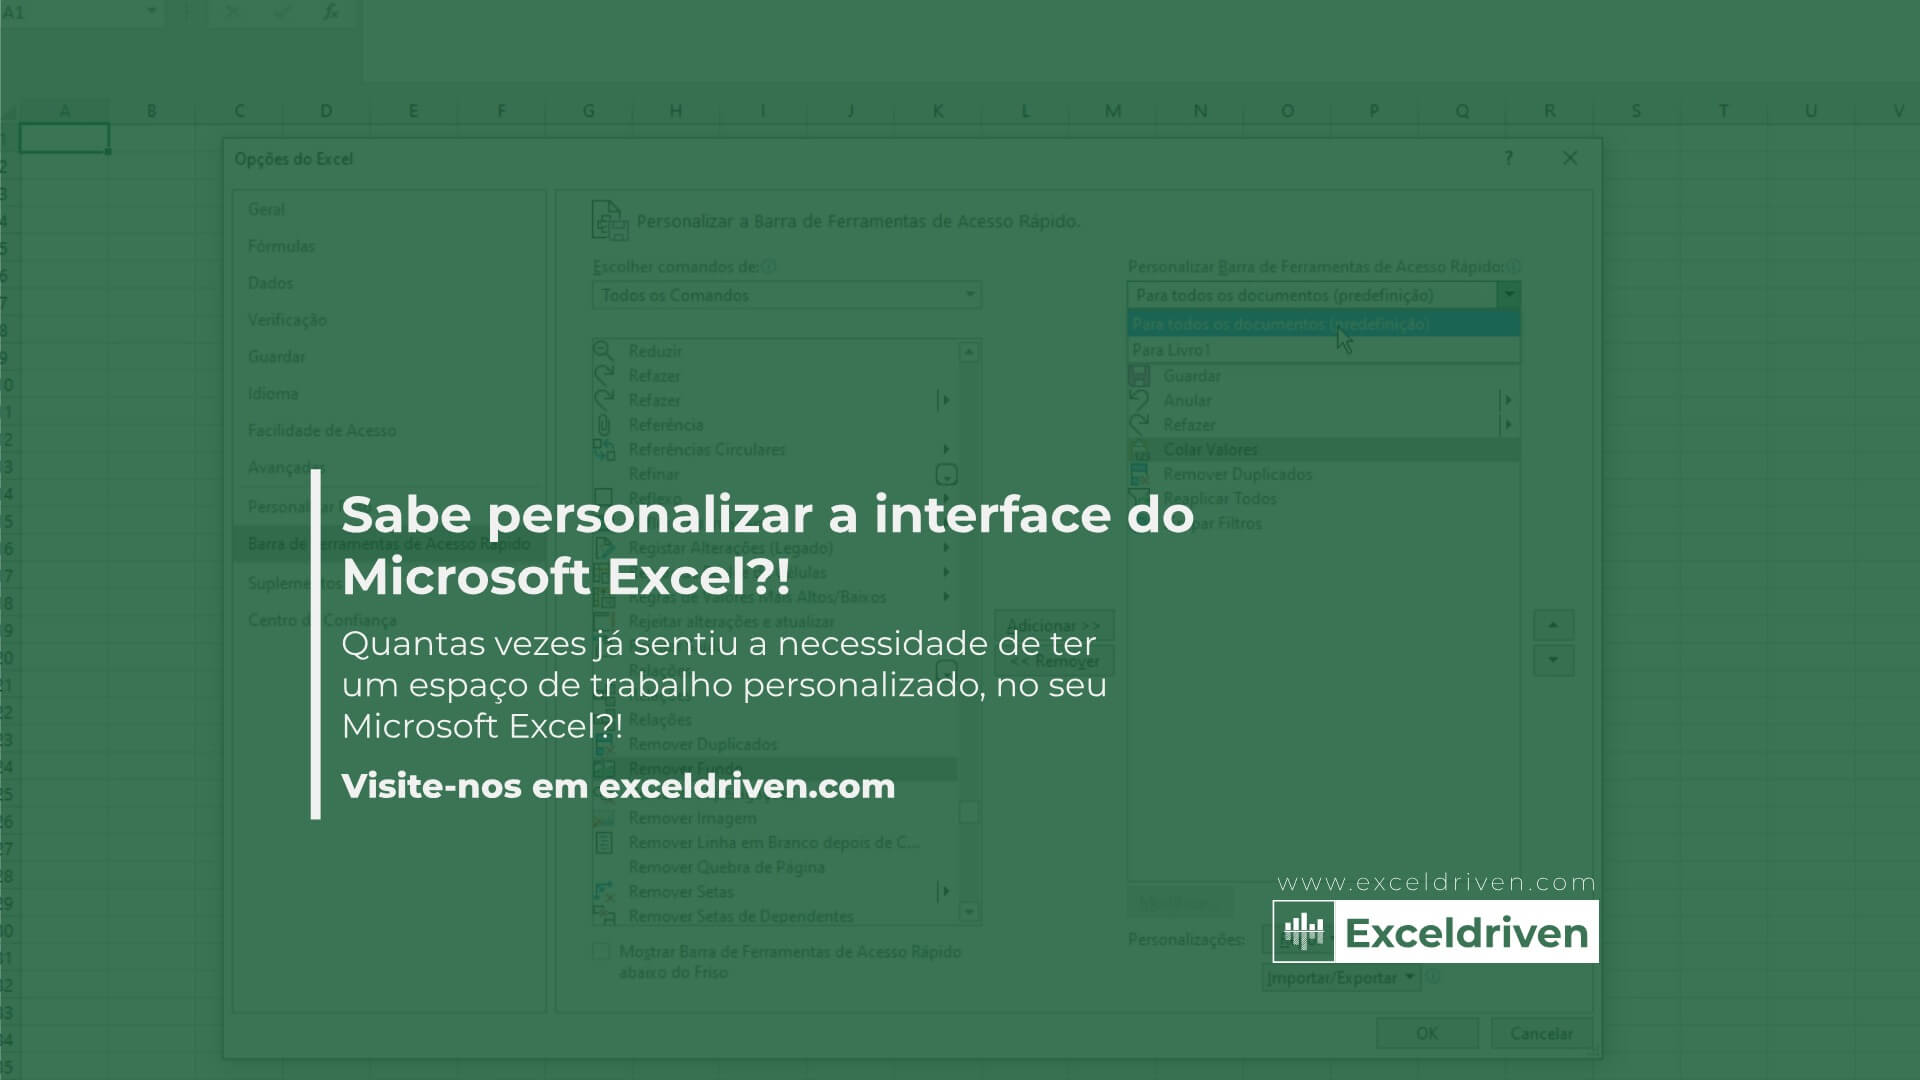 Sabe personalizar a interface do Microsoft Excel?!